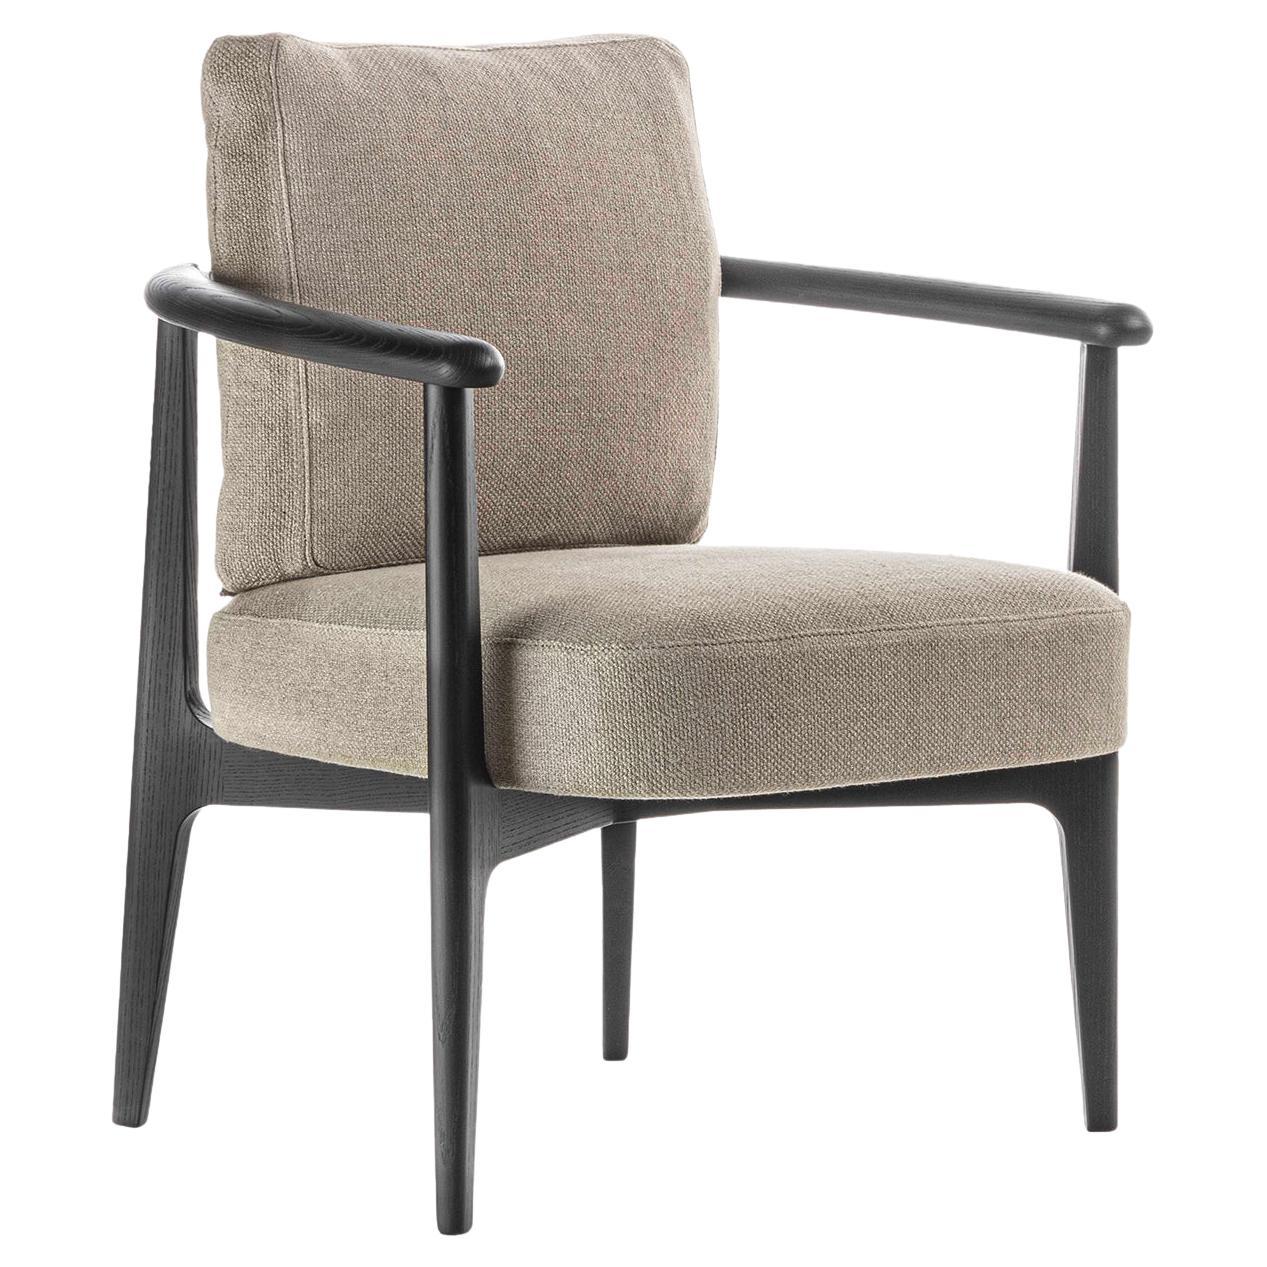 Greta Beige Chair With Arms For Sale